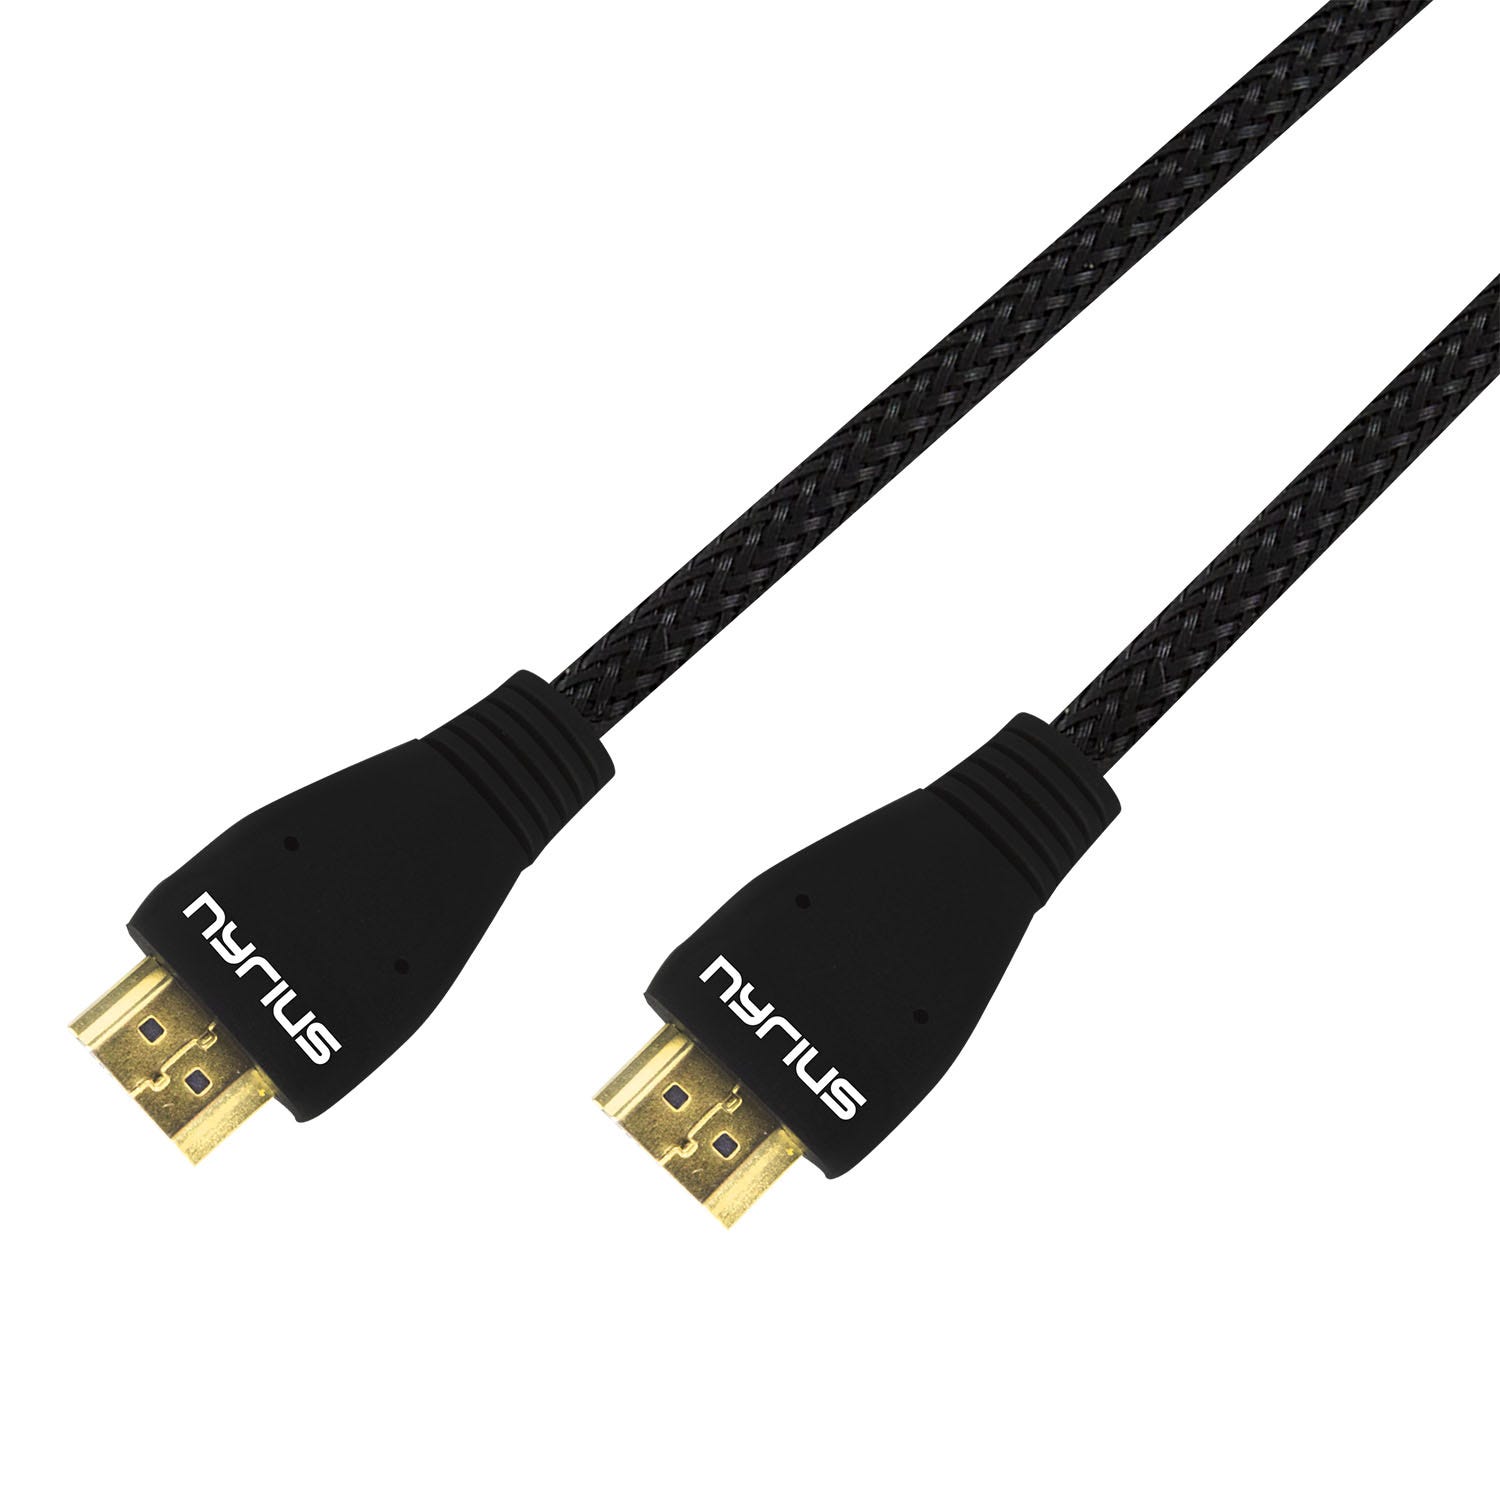 High Speed HDMI Cable (6 Feet) Supports 3D, Ethernet, & Audio Return